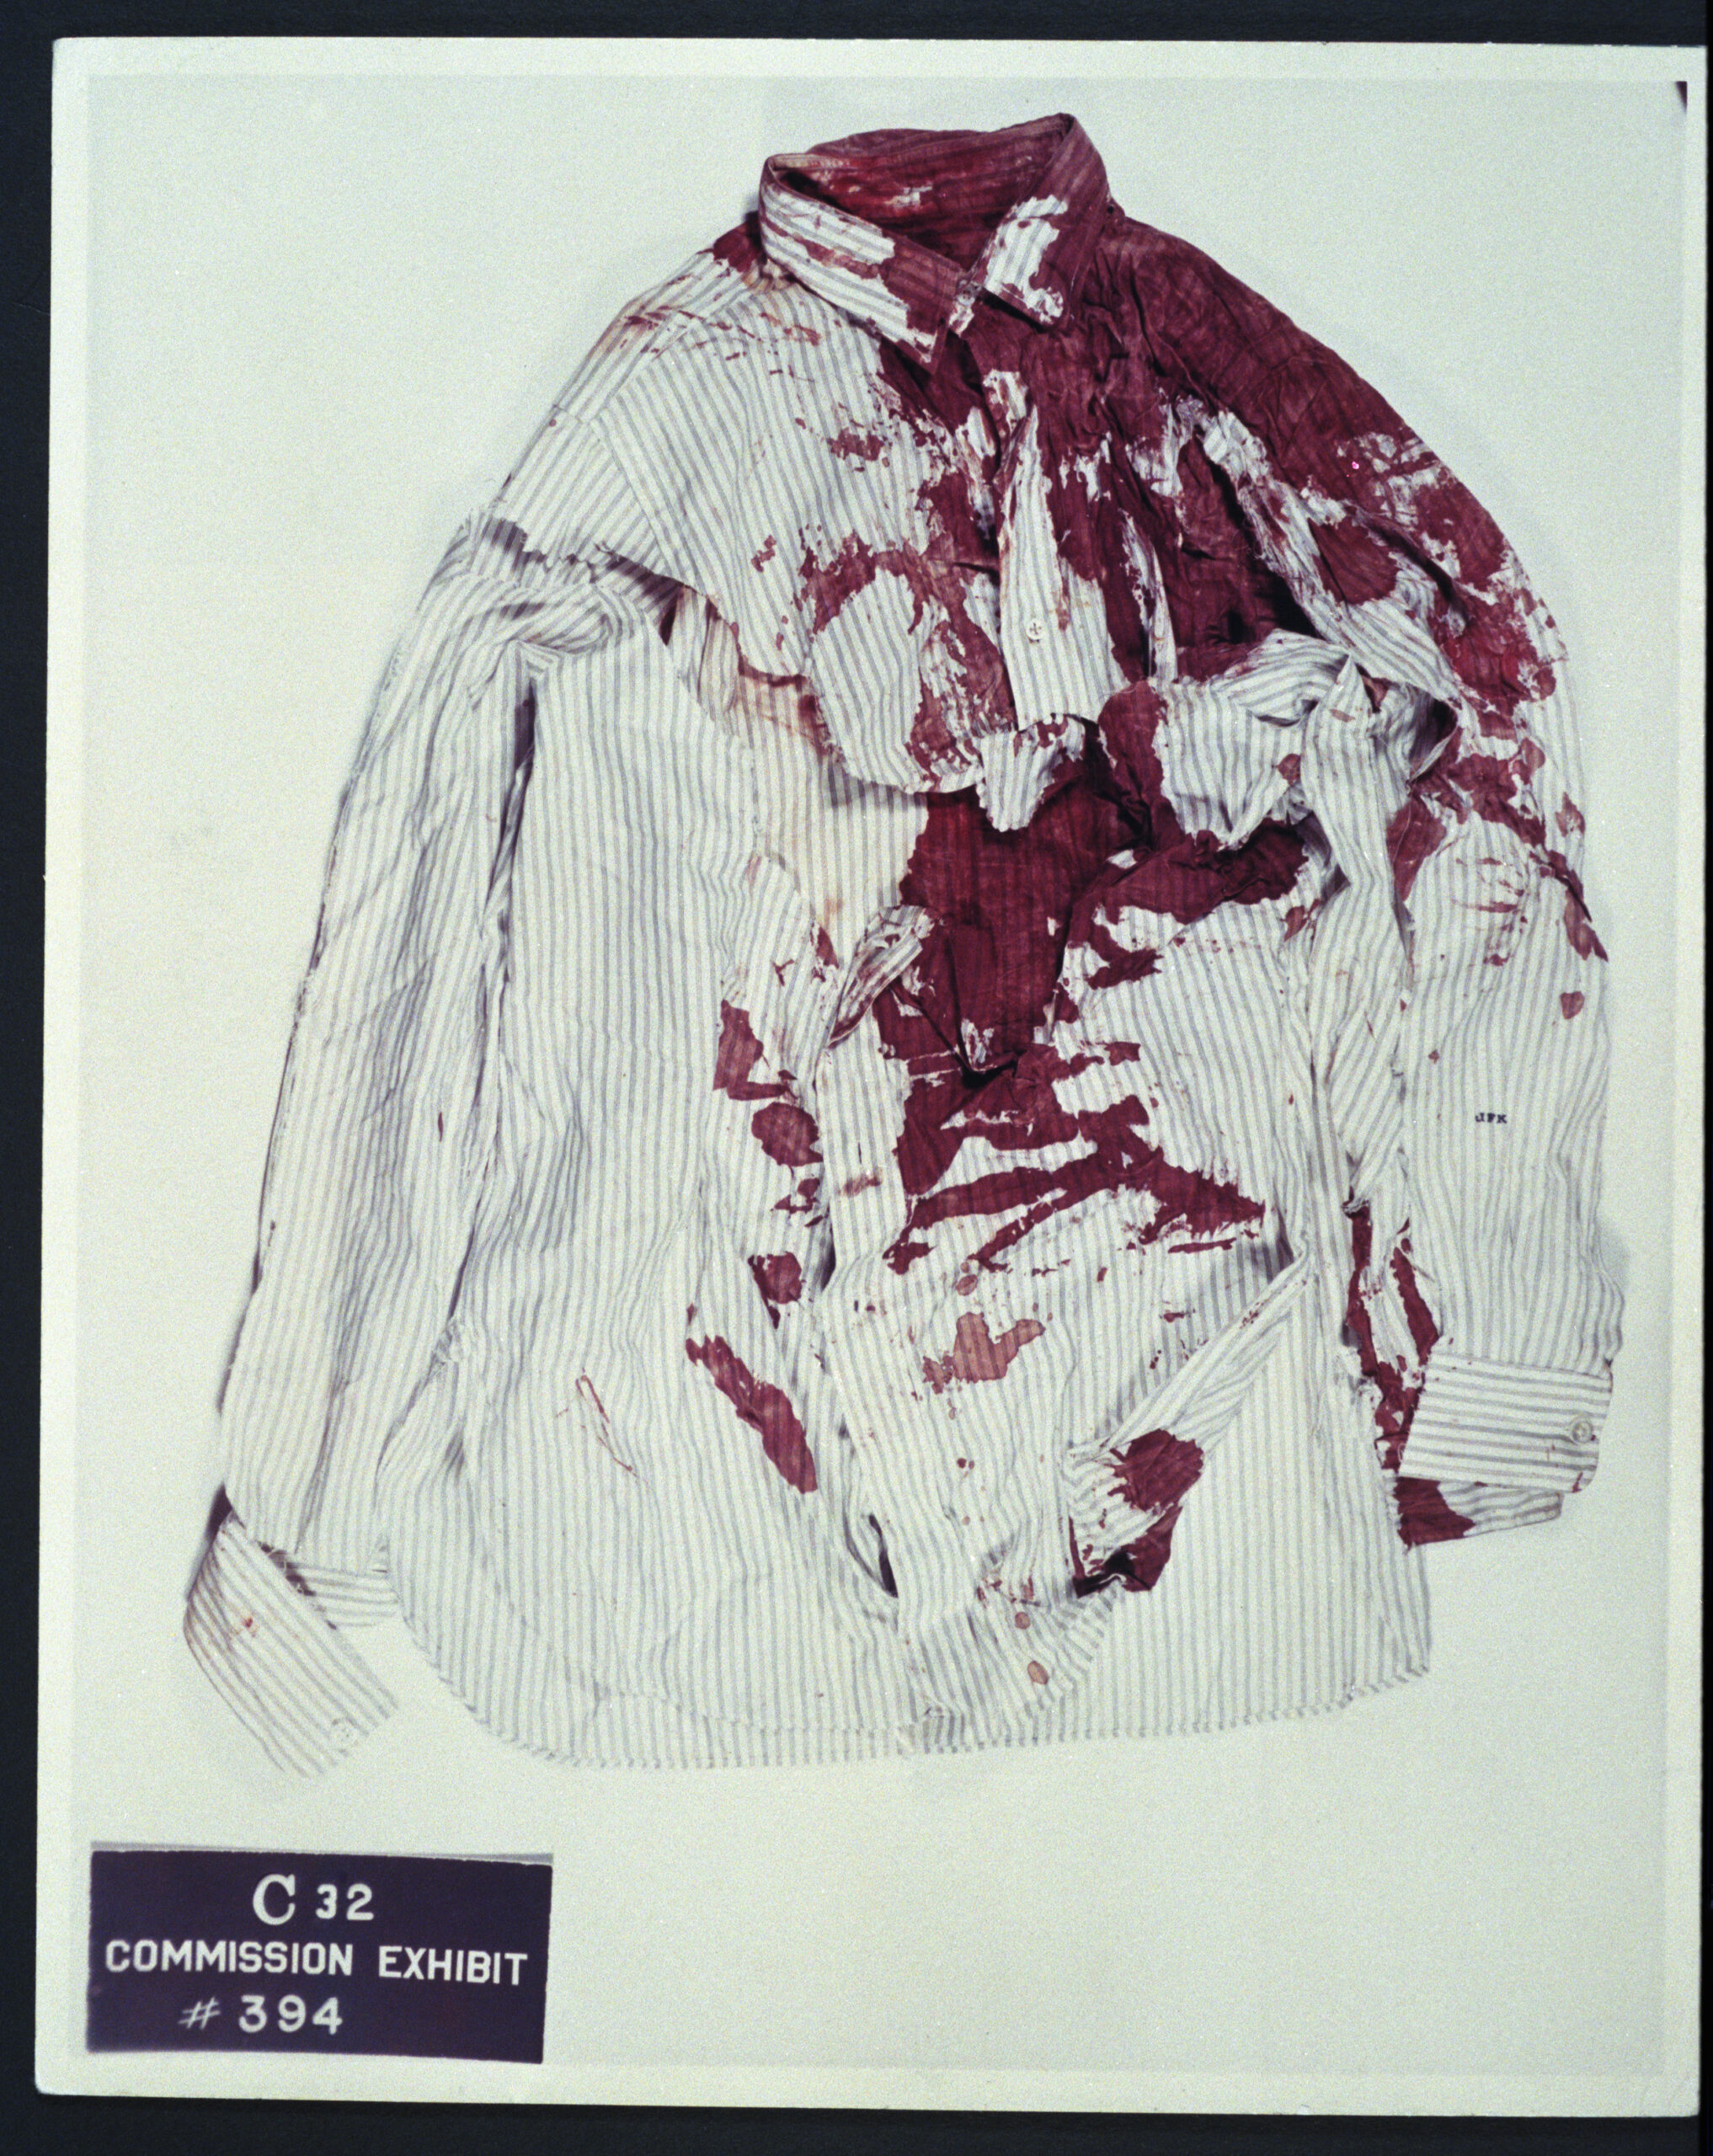 It's true that there are pictures of former US President John F. Kennedy's bloodstained bloody shirt from the day he was assassinated.